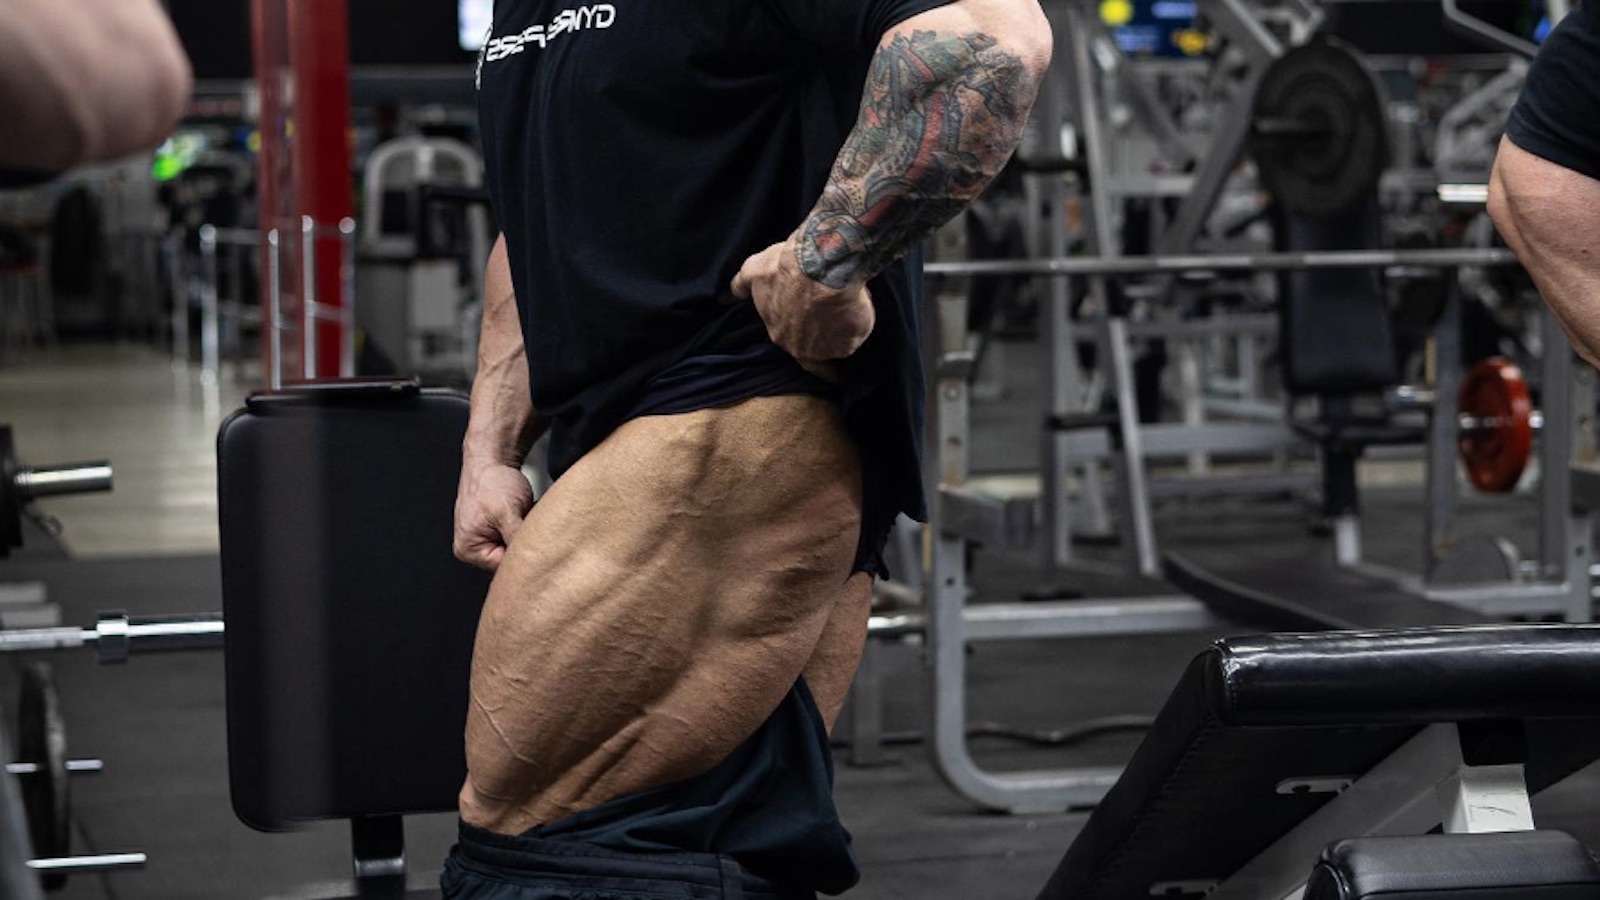 Iain Valliere Reveals Shredded Legs as He Preps For 2023 Toronto Professional